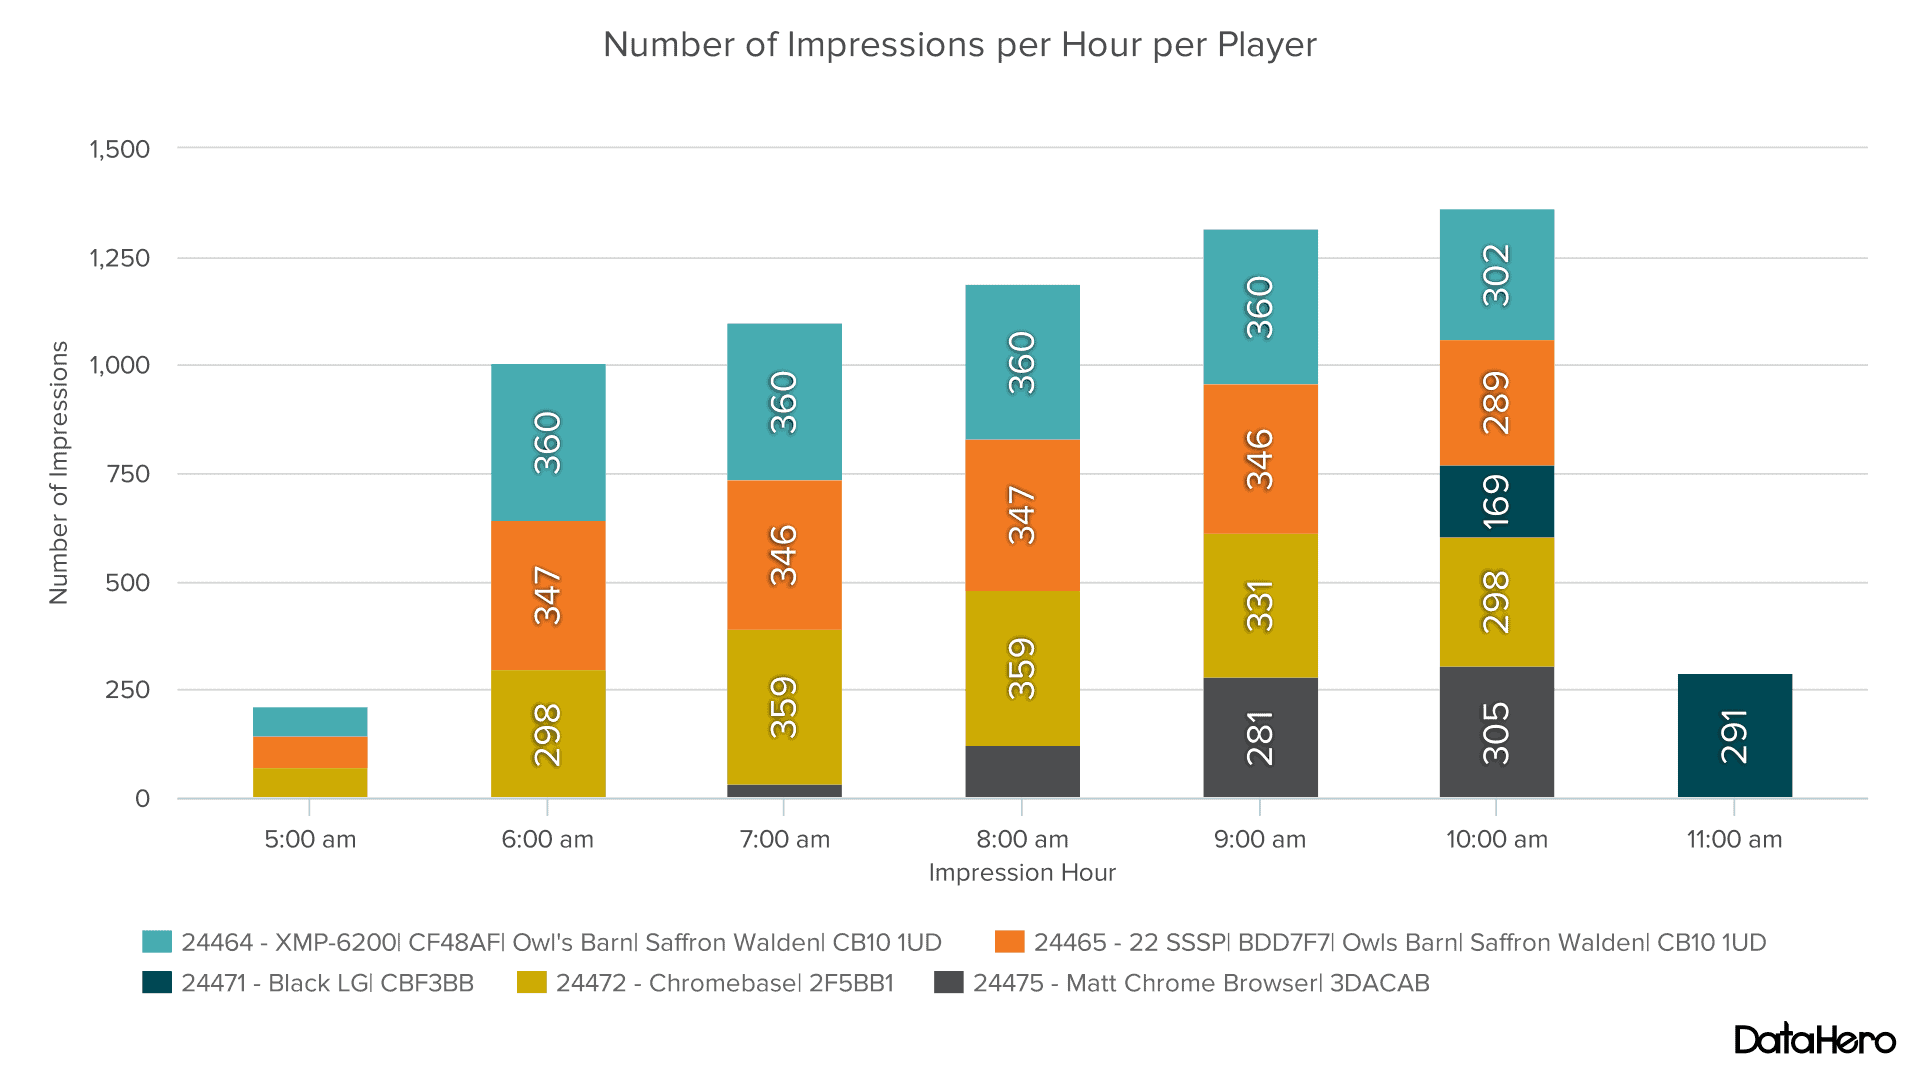 DataHero-Number-of-Impressions-per-Hour-per-Player